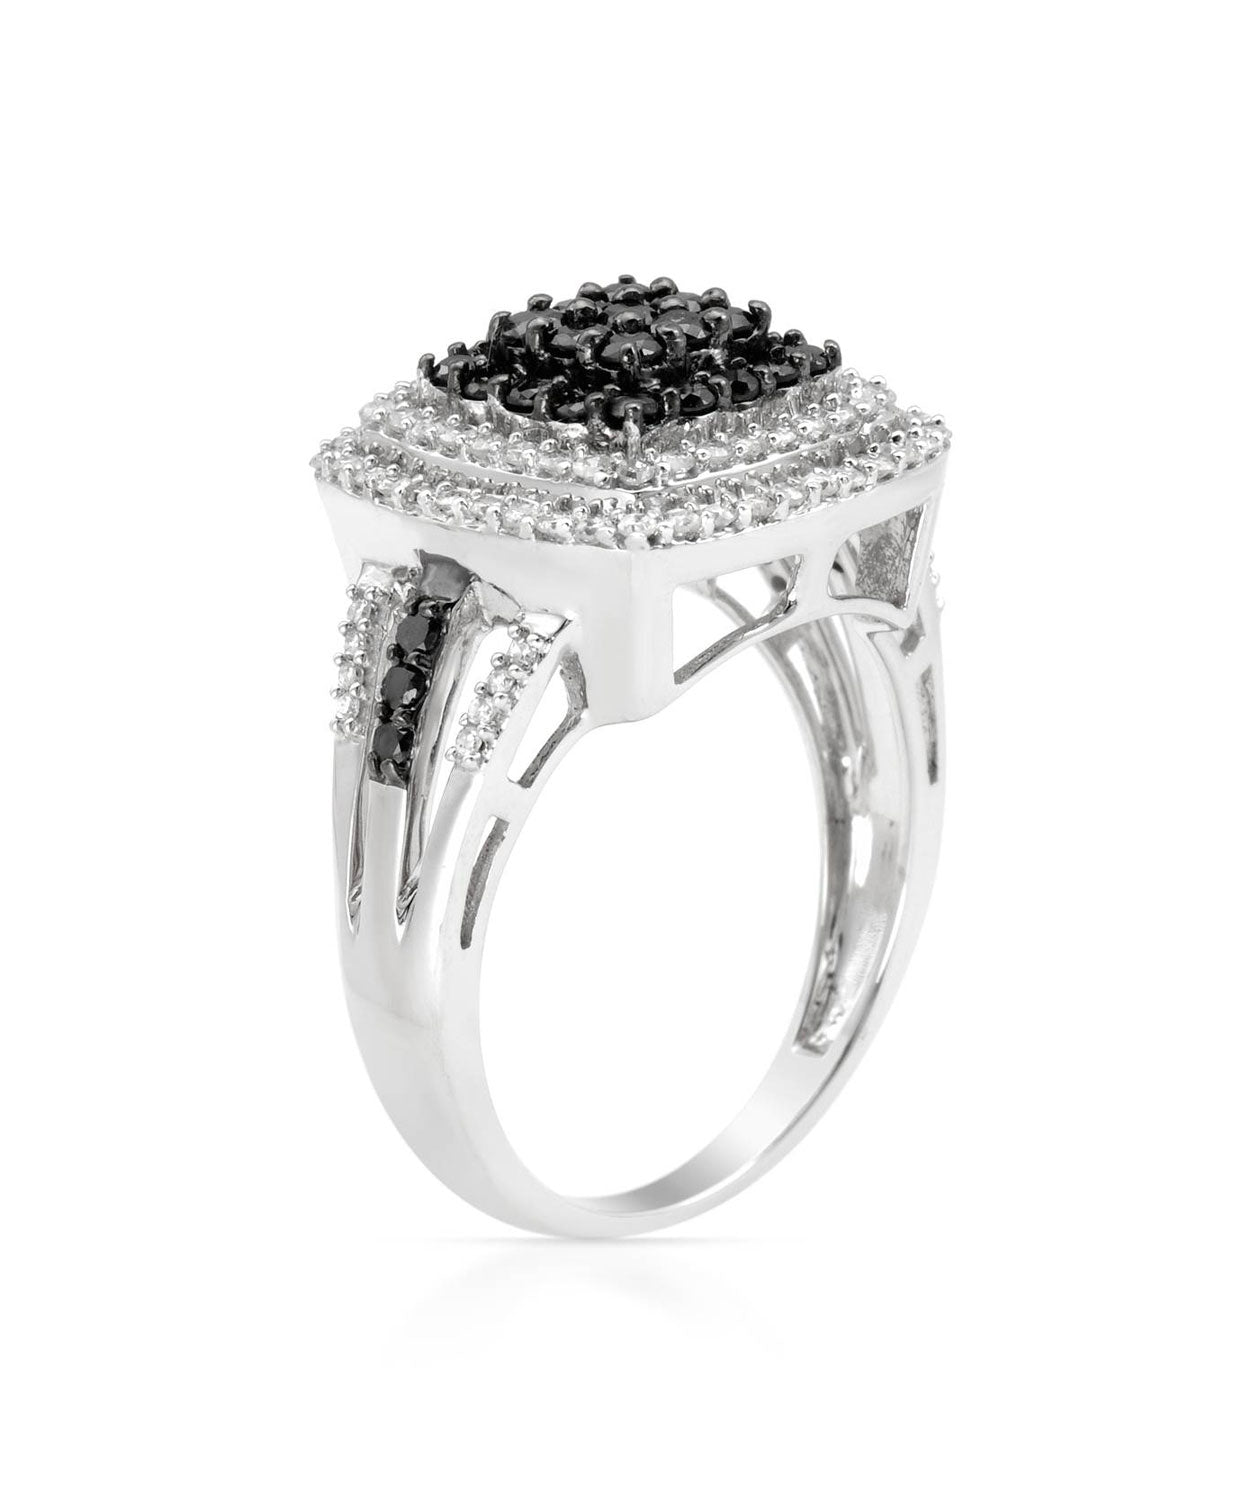 Black & White Collection 0.90 ctw Diamonds 14k White Gold Right Hand Ring View 2